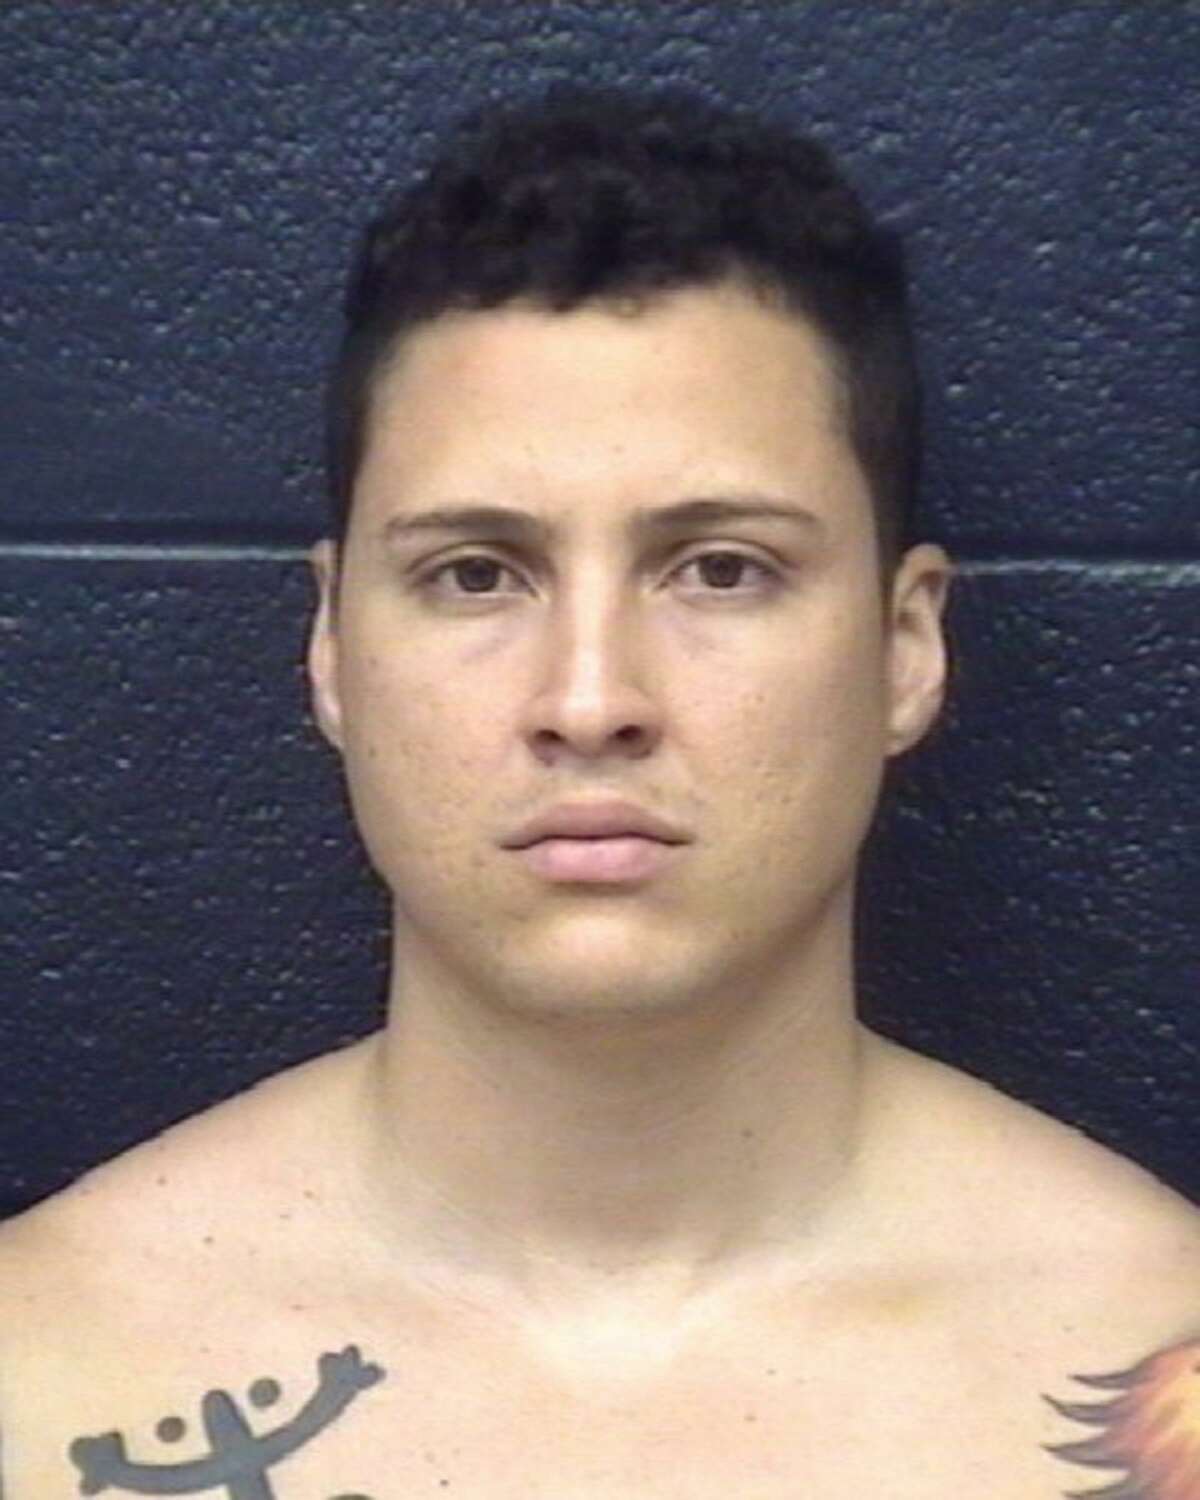 Texas authorities say Ronald Anthony Burgos Aviles, a supervisor for the U.S. Border Patrol, killed his girlfriend and her 1-year-old child before calling 911 claiming to have discovered the bodies in a city park. Aviles was being held without bond Tuesday in the Webb County jail on two counts of capital murder.